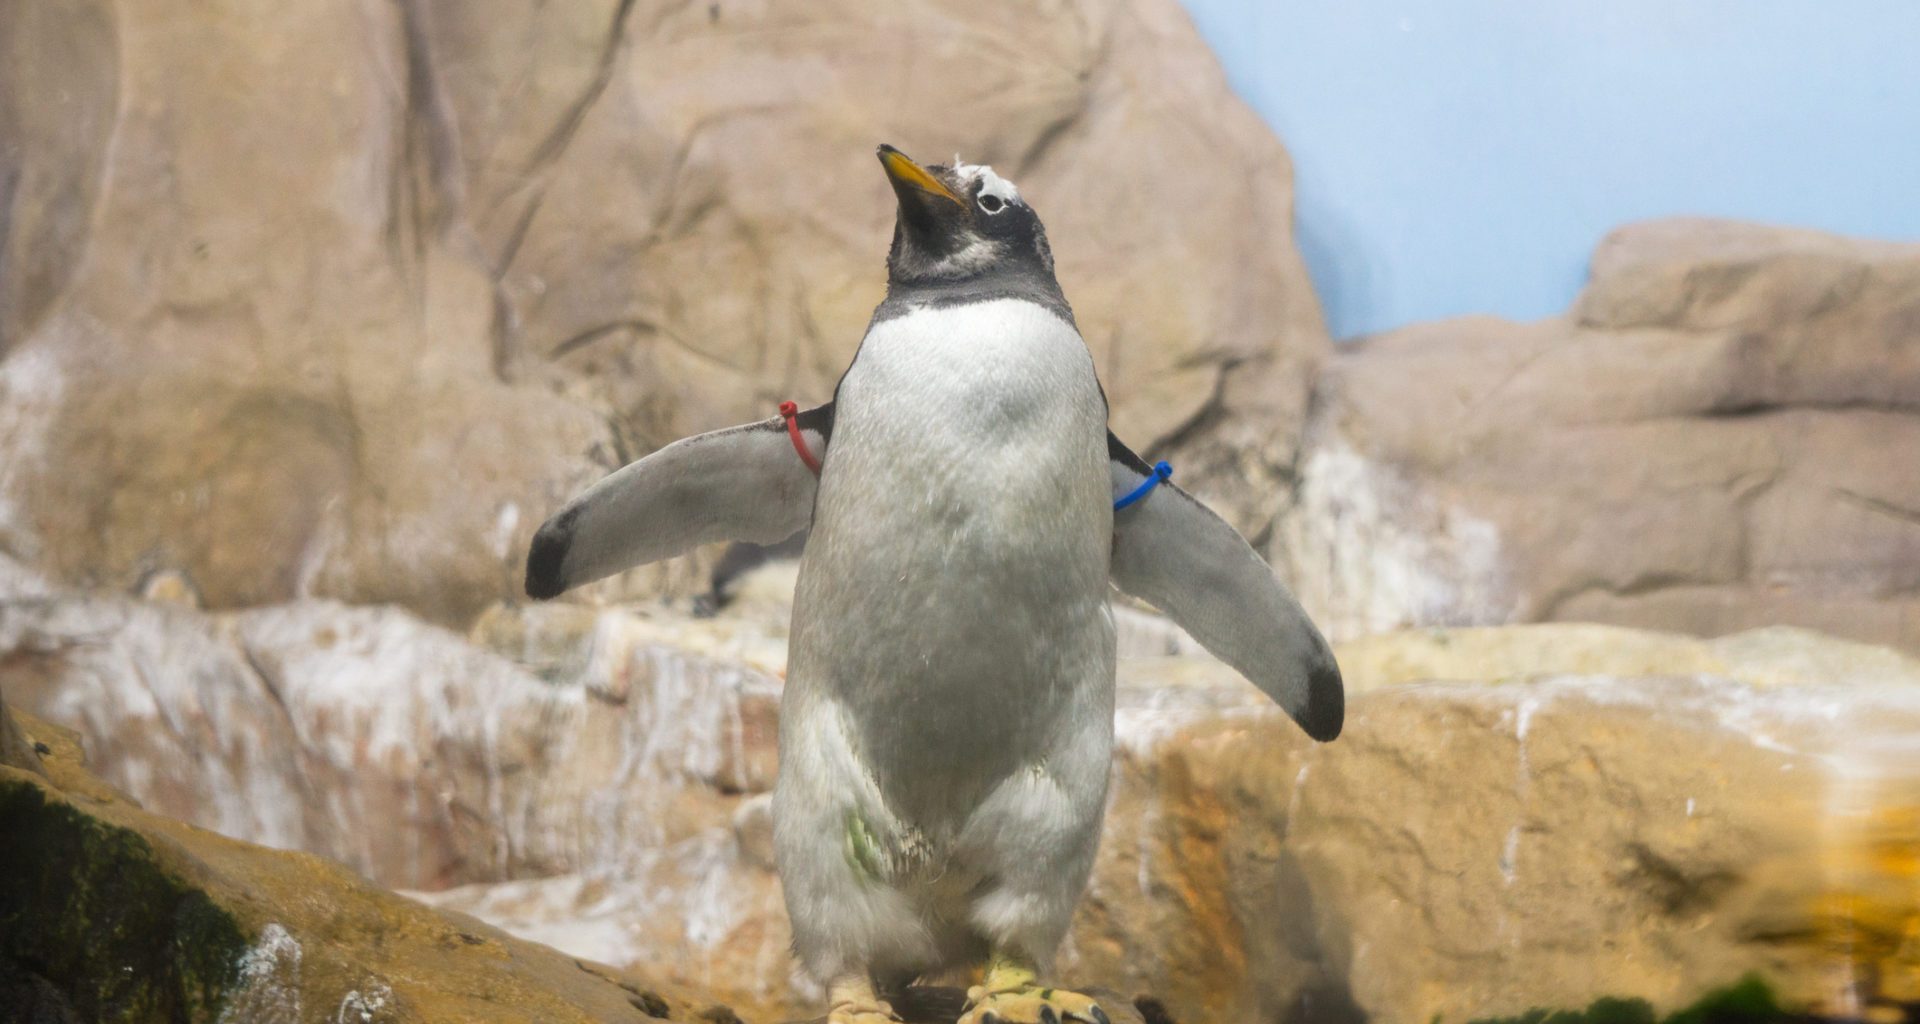 Claim Edinburgh Zoo employs penguin erector after planes fly over is FFS 7